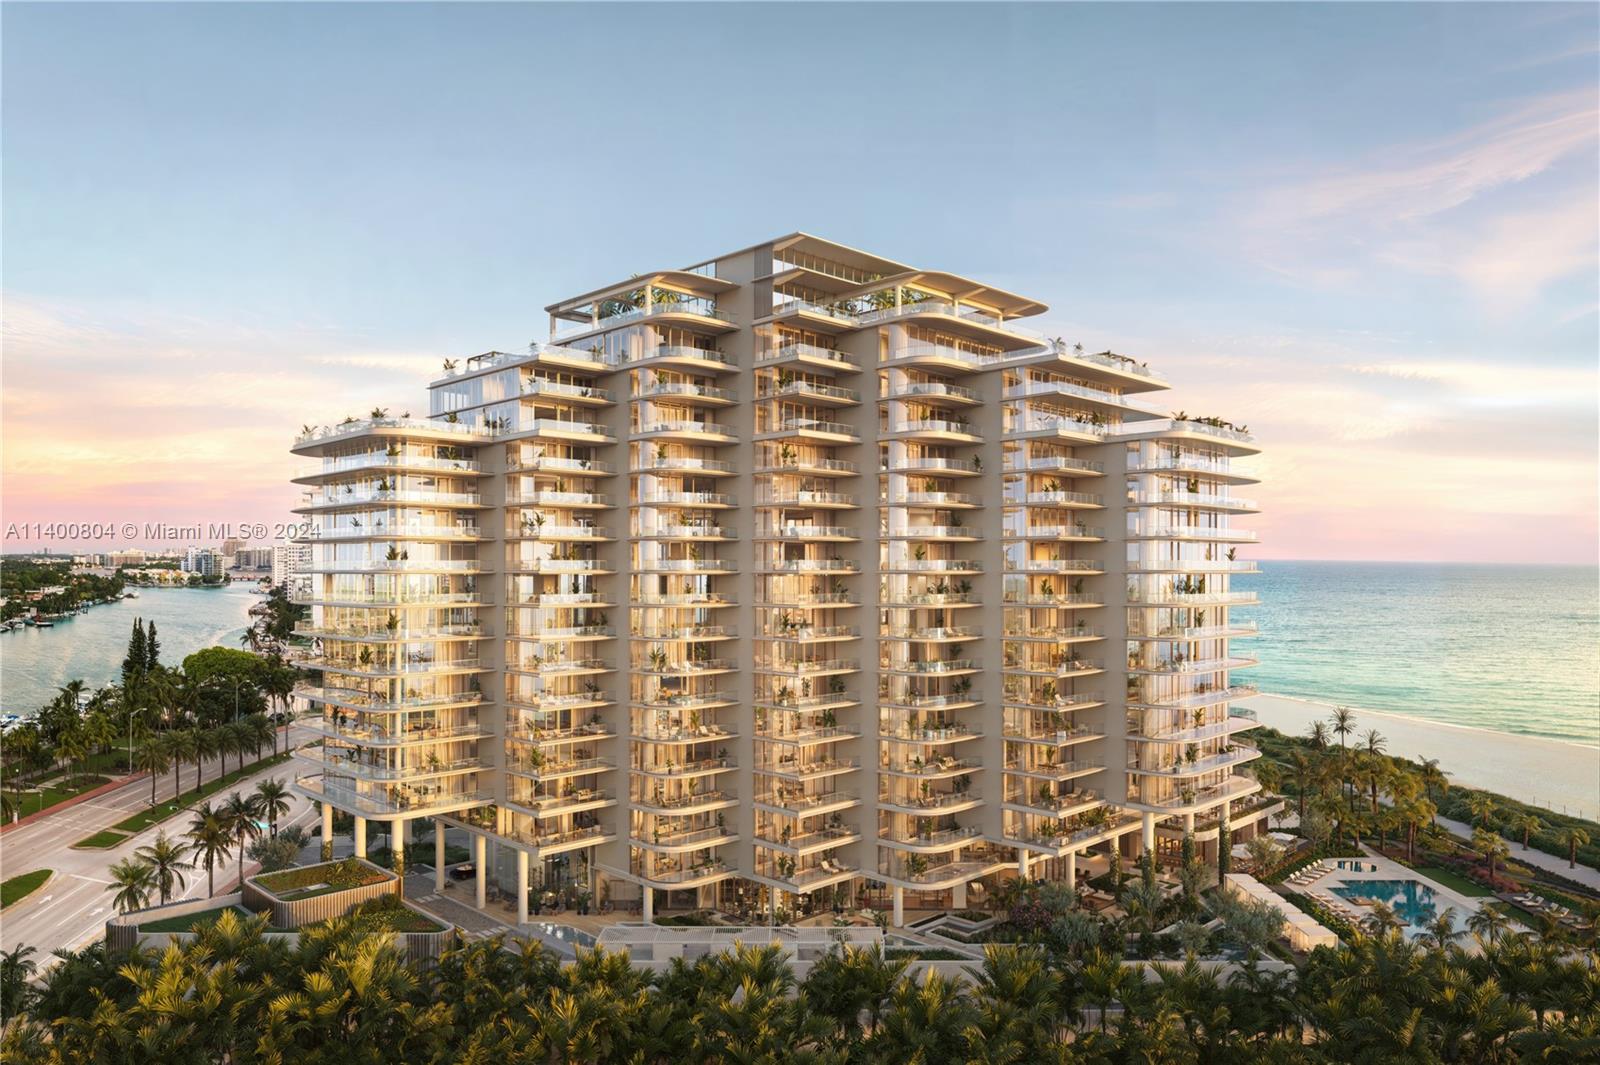 Rising from the most peaceful and expansive stretch of sand on Miami Beach’s coastline, The Perigon is an unprecedented collaboration between three global design icons. The rare seclusion, matchless amenities, and impeccable service of this unique private enclave promises residents an exclusive Miami Beach lifestyle.This 4 bedroom residence with over 3808SF of living space and 2240SF of terraces makes this one of the best options on the market. Buyer chooses - Kitchen cabinets, flooring options, closets installed - Developer inventory is subject to change based on activity of sales. Gas cooking, Wolf & SubZero appliance, stone countertops Parking is self park or valet park (owners choice) - Contact the Sales Gallery to learn more about the finest new building in Miami Beach.